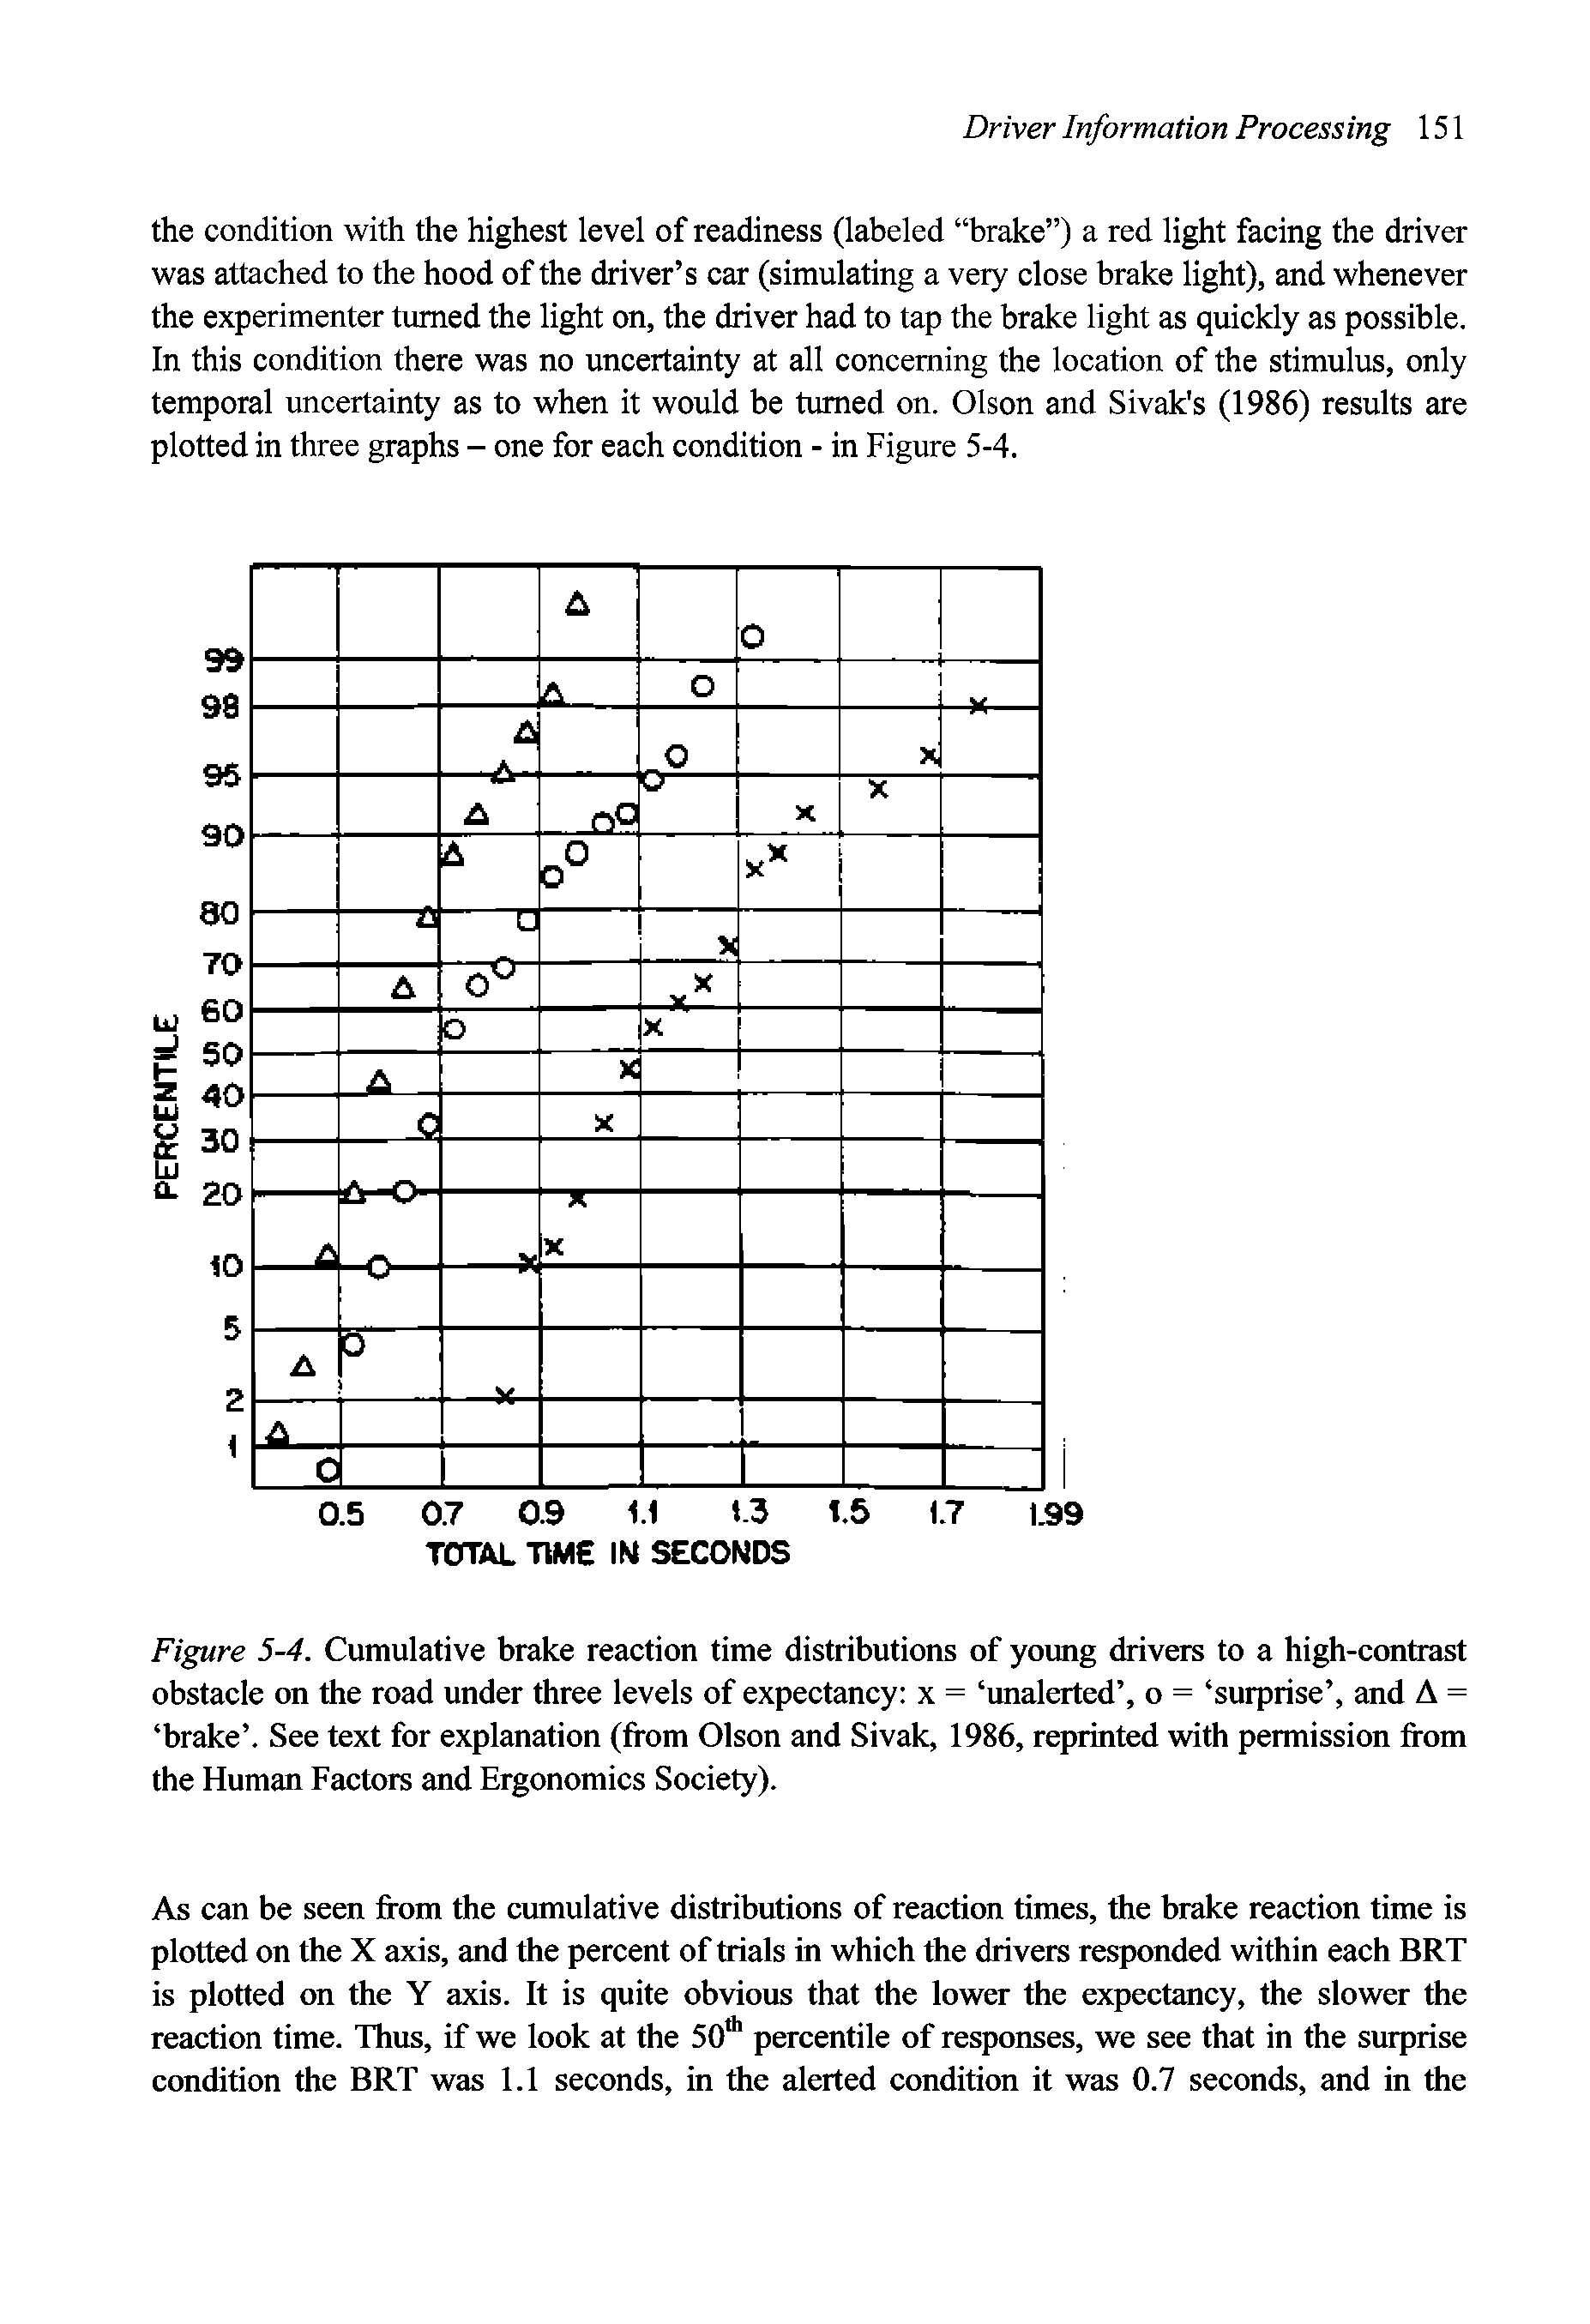 Figure 5-4. Cumulative brake reaction time distributions of young drivers to a high-contrast obstacle on the road under three levels of expectancy x = unalerted , o = surprise , and A = brake . See text for explanation (from Olson and Sivak, 1986, reprinted with permission from the Human Factors and Ergonomics Society).